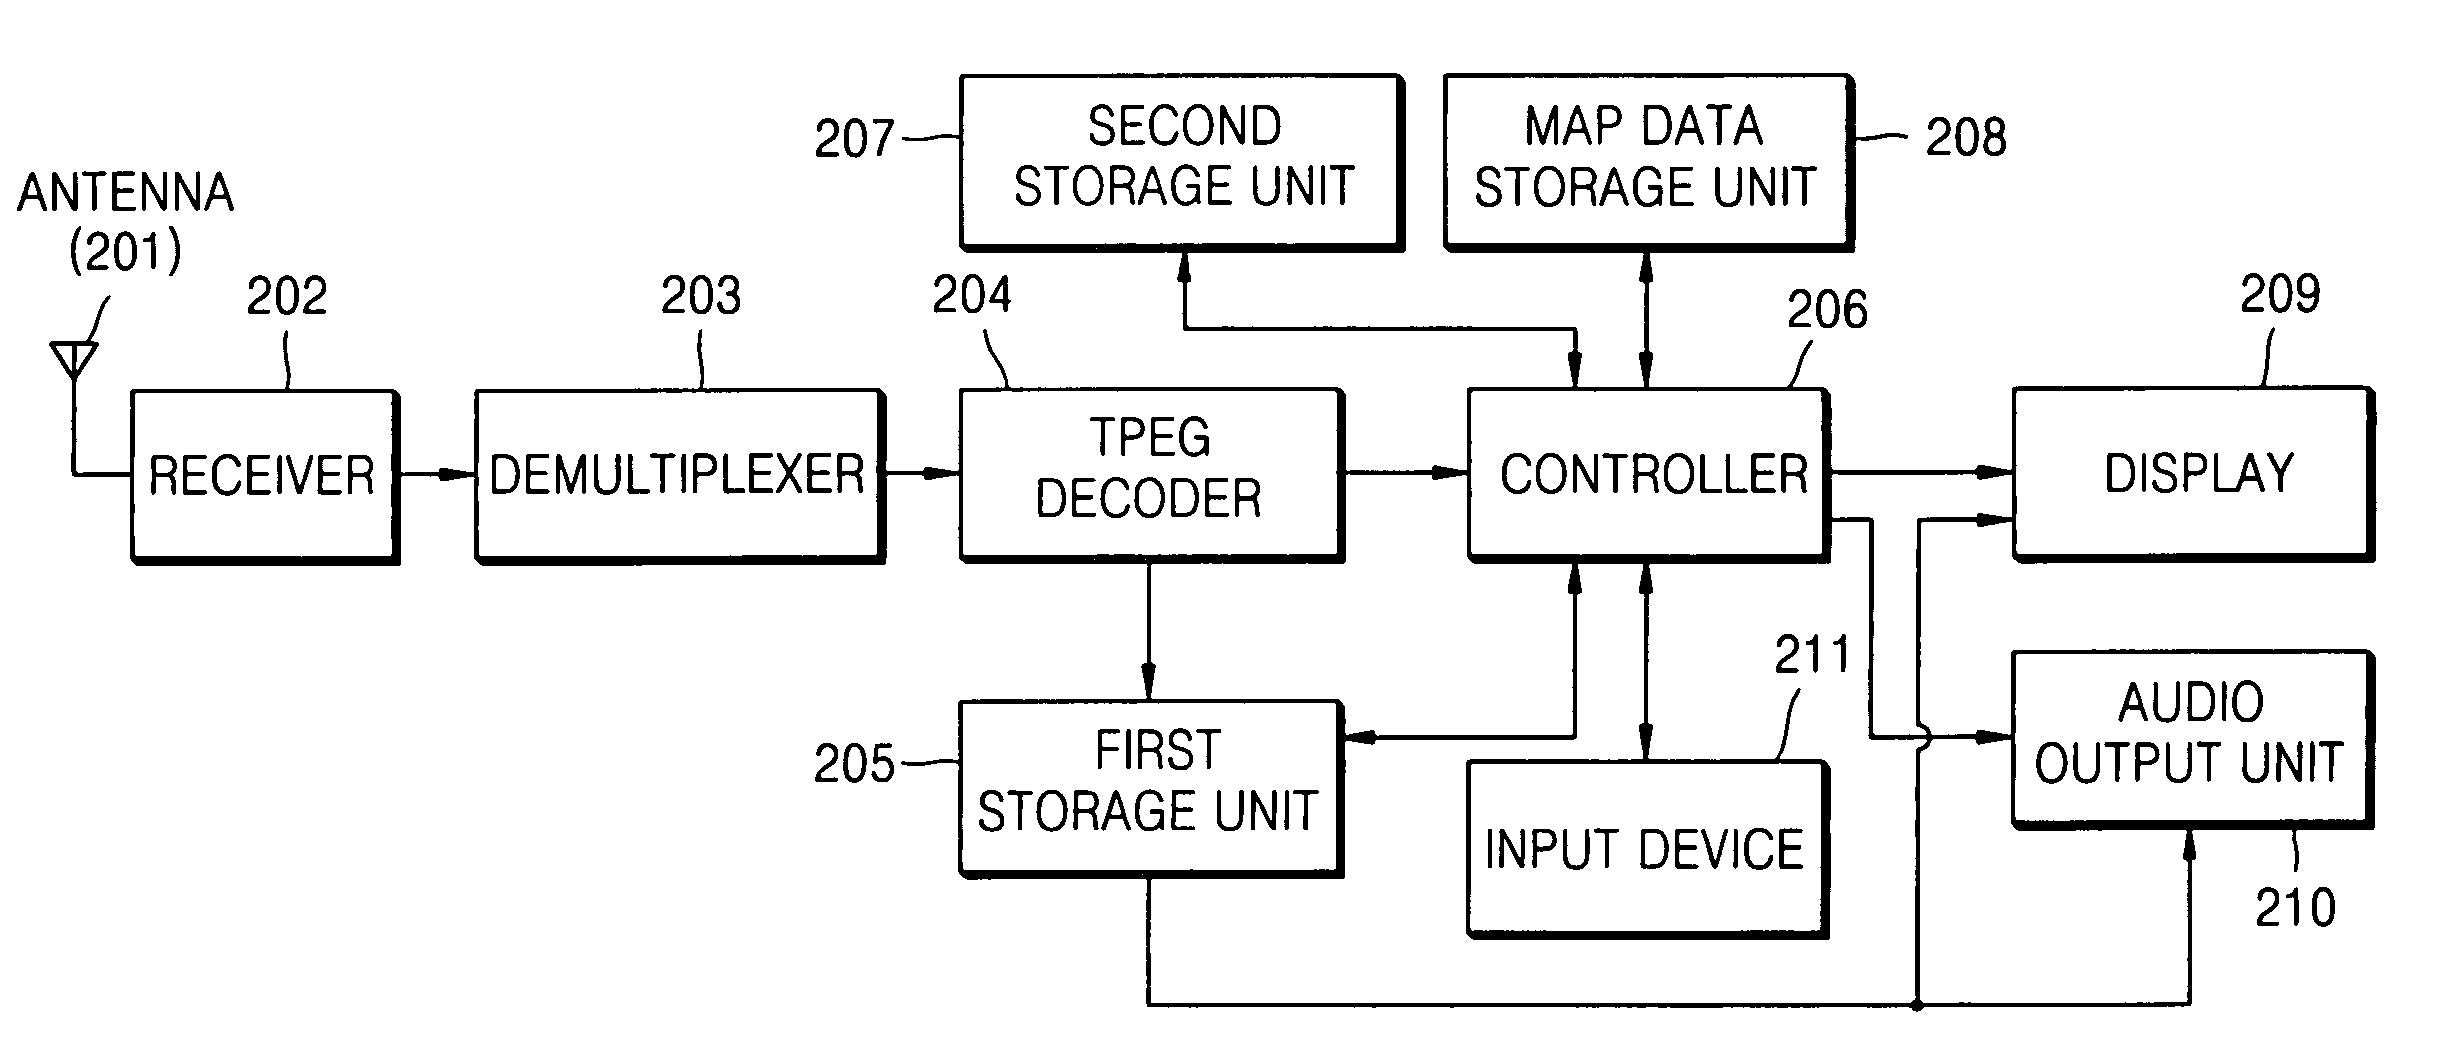 Method and apparatus for updating map data, and computer-readable medium storing program for executing the method